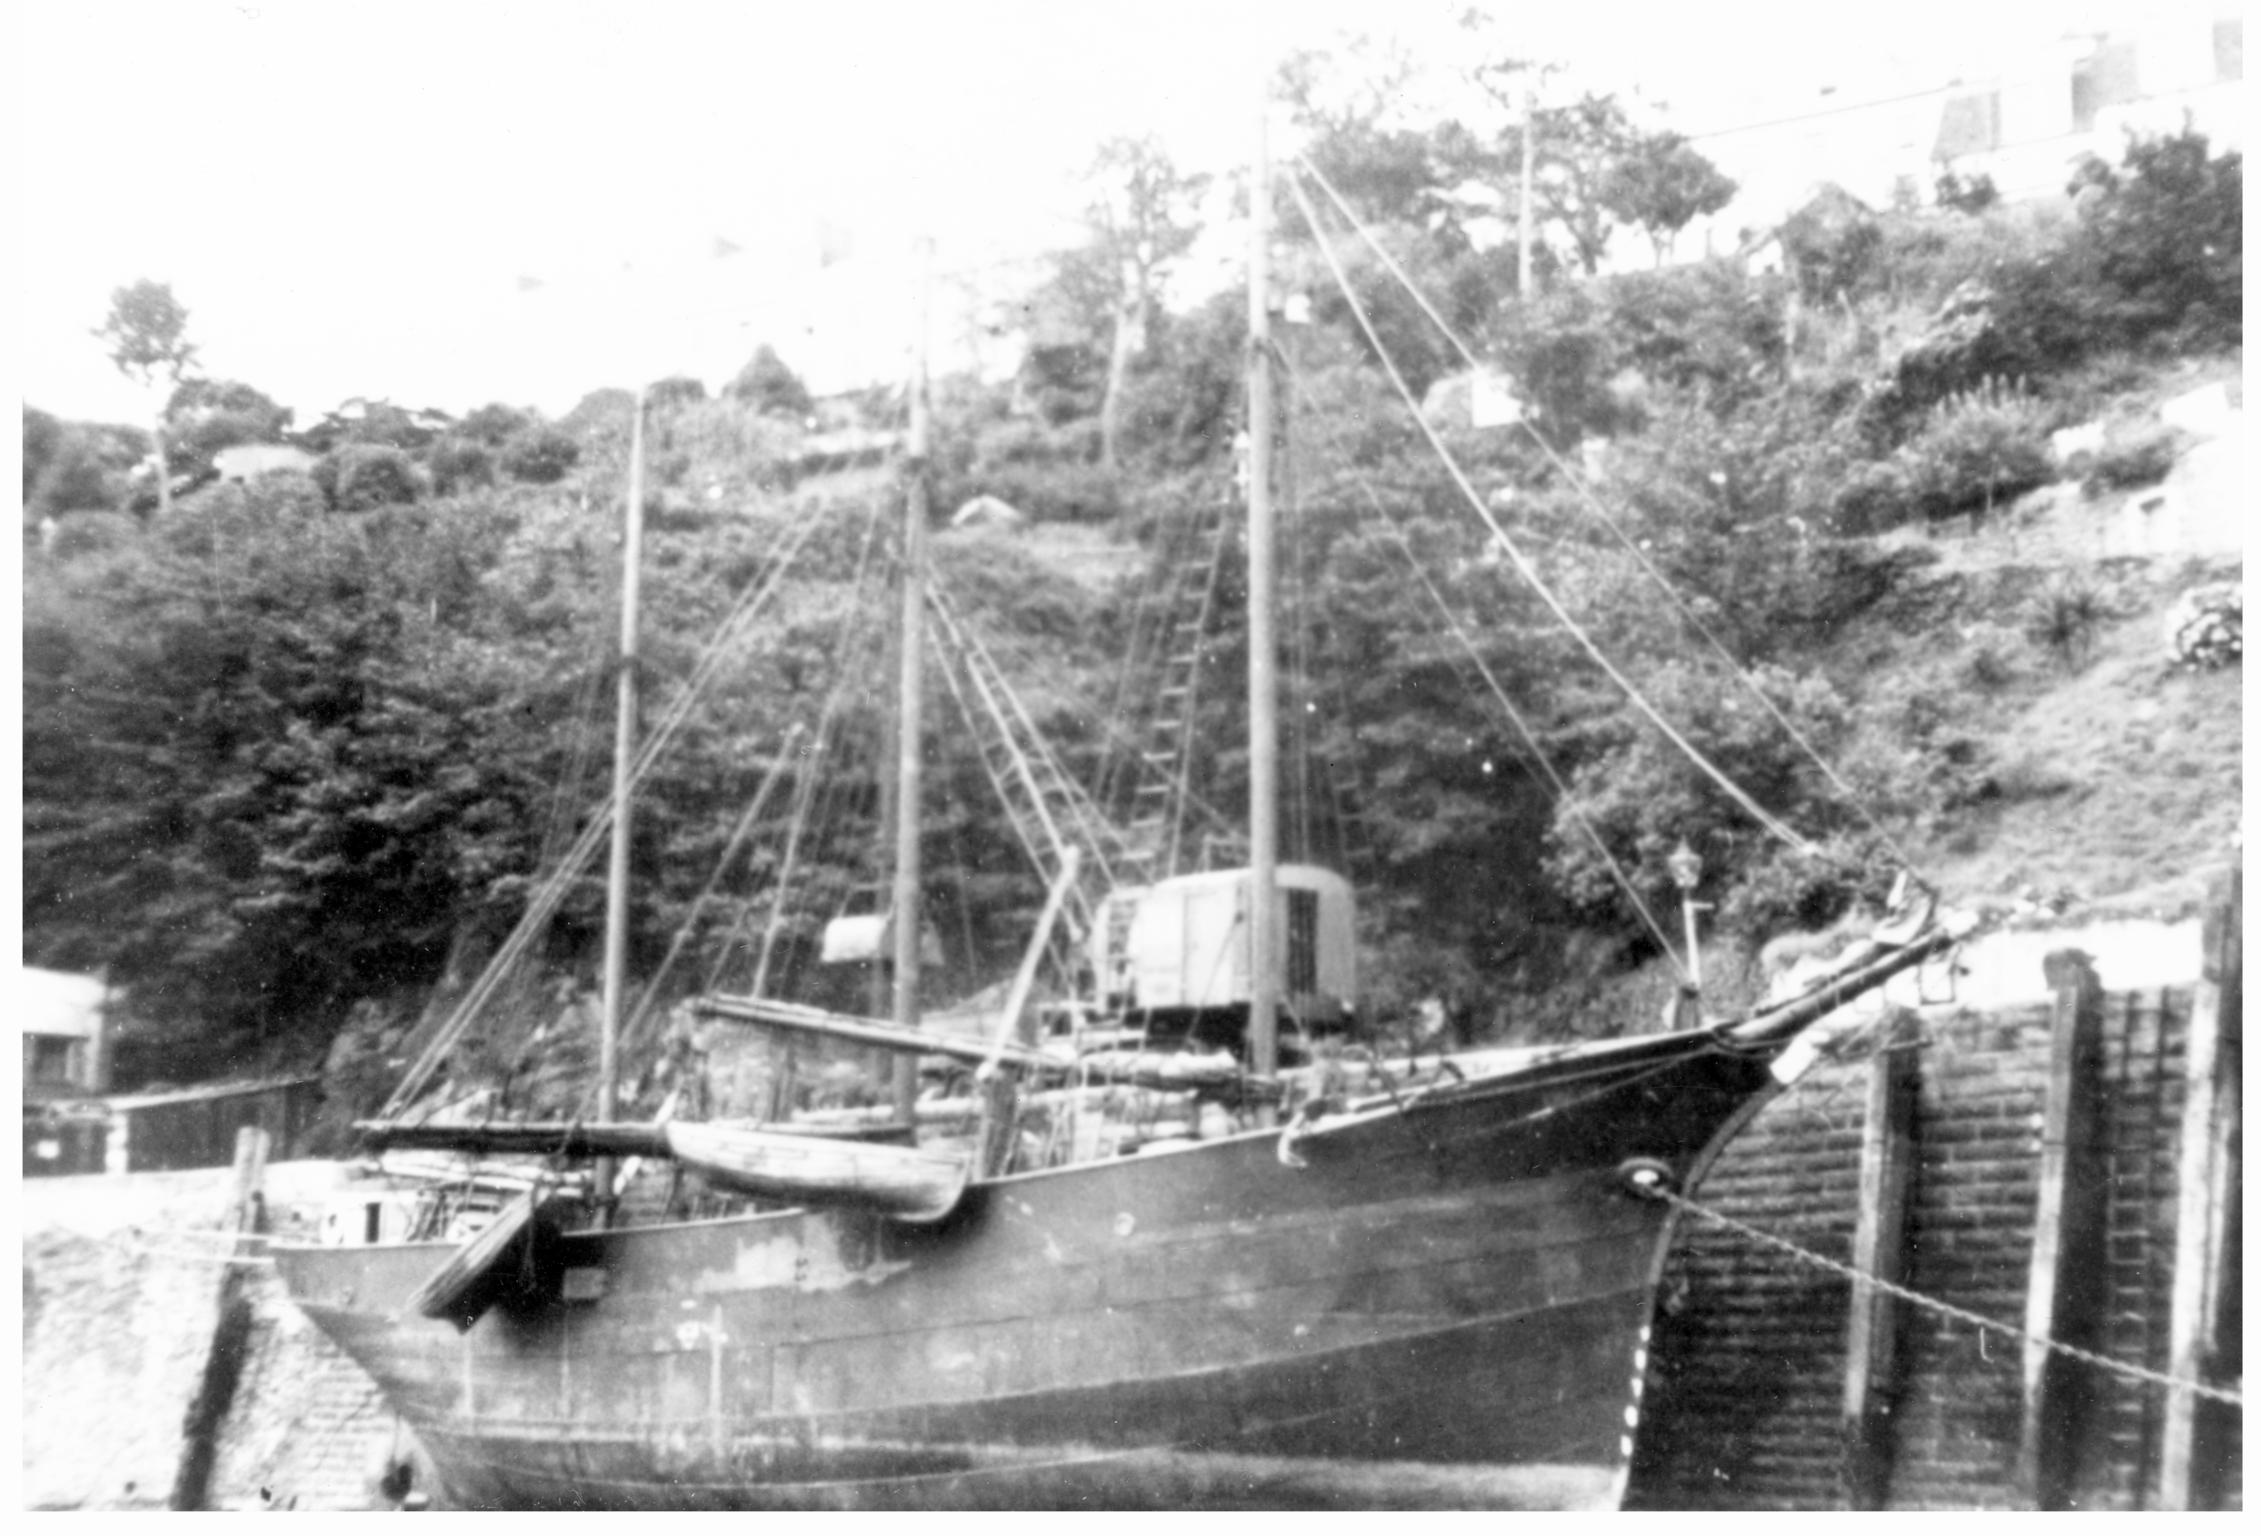 EILIAN at Ilfracombe Harbour, photograph